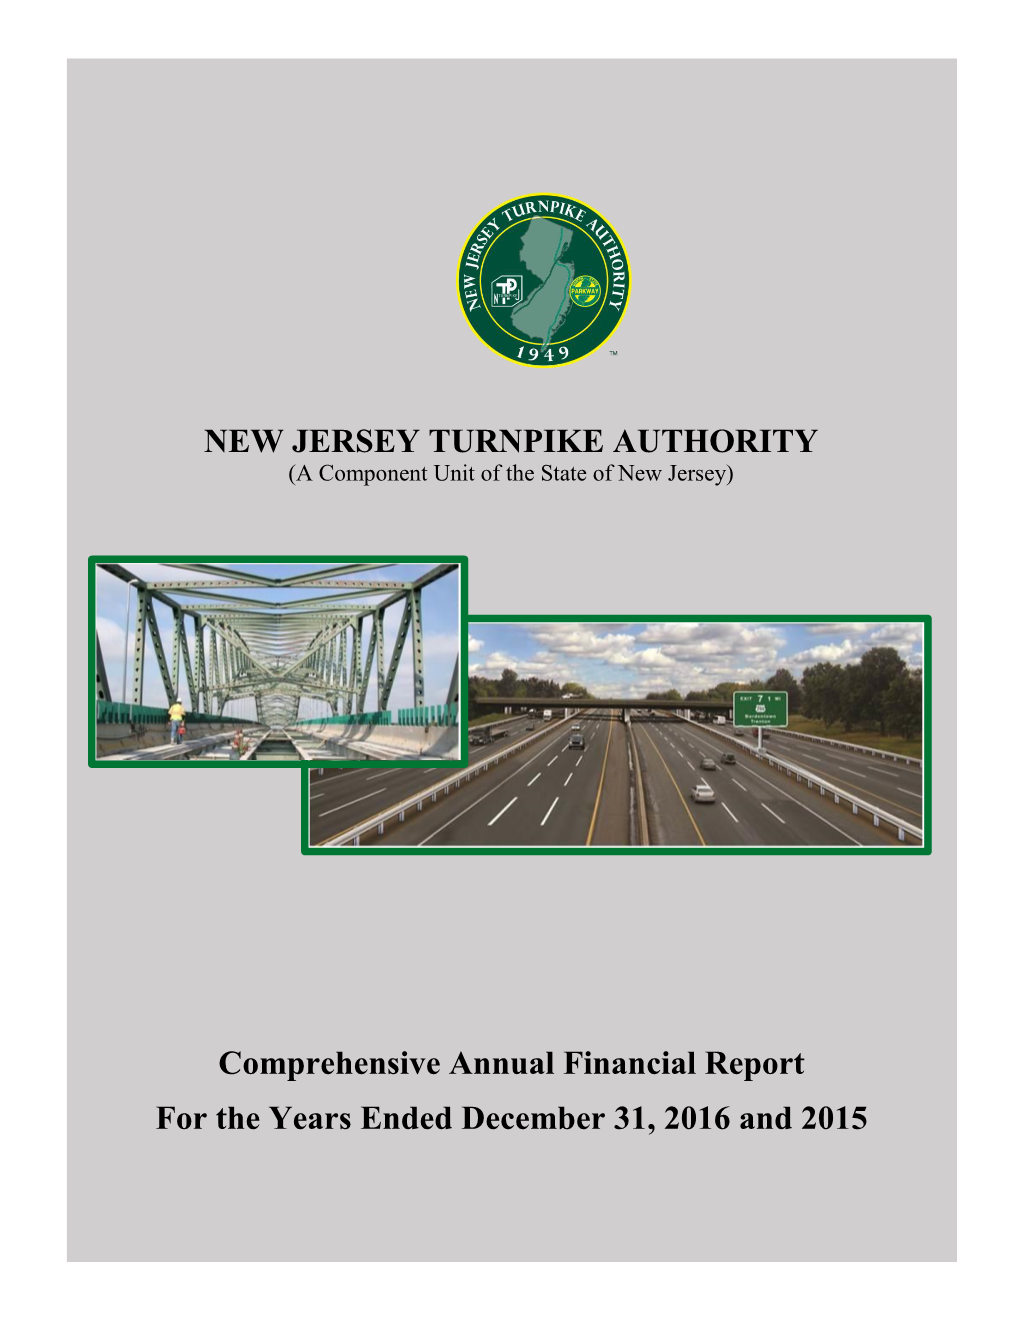 NEW JERSEY TURNPIKE AUTHORITY Comprehensive Annual Financial Report for the Years Ended December 31, 2016 and 2015